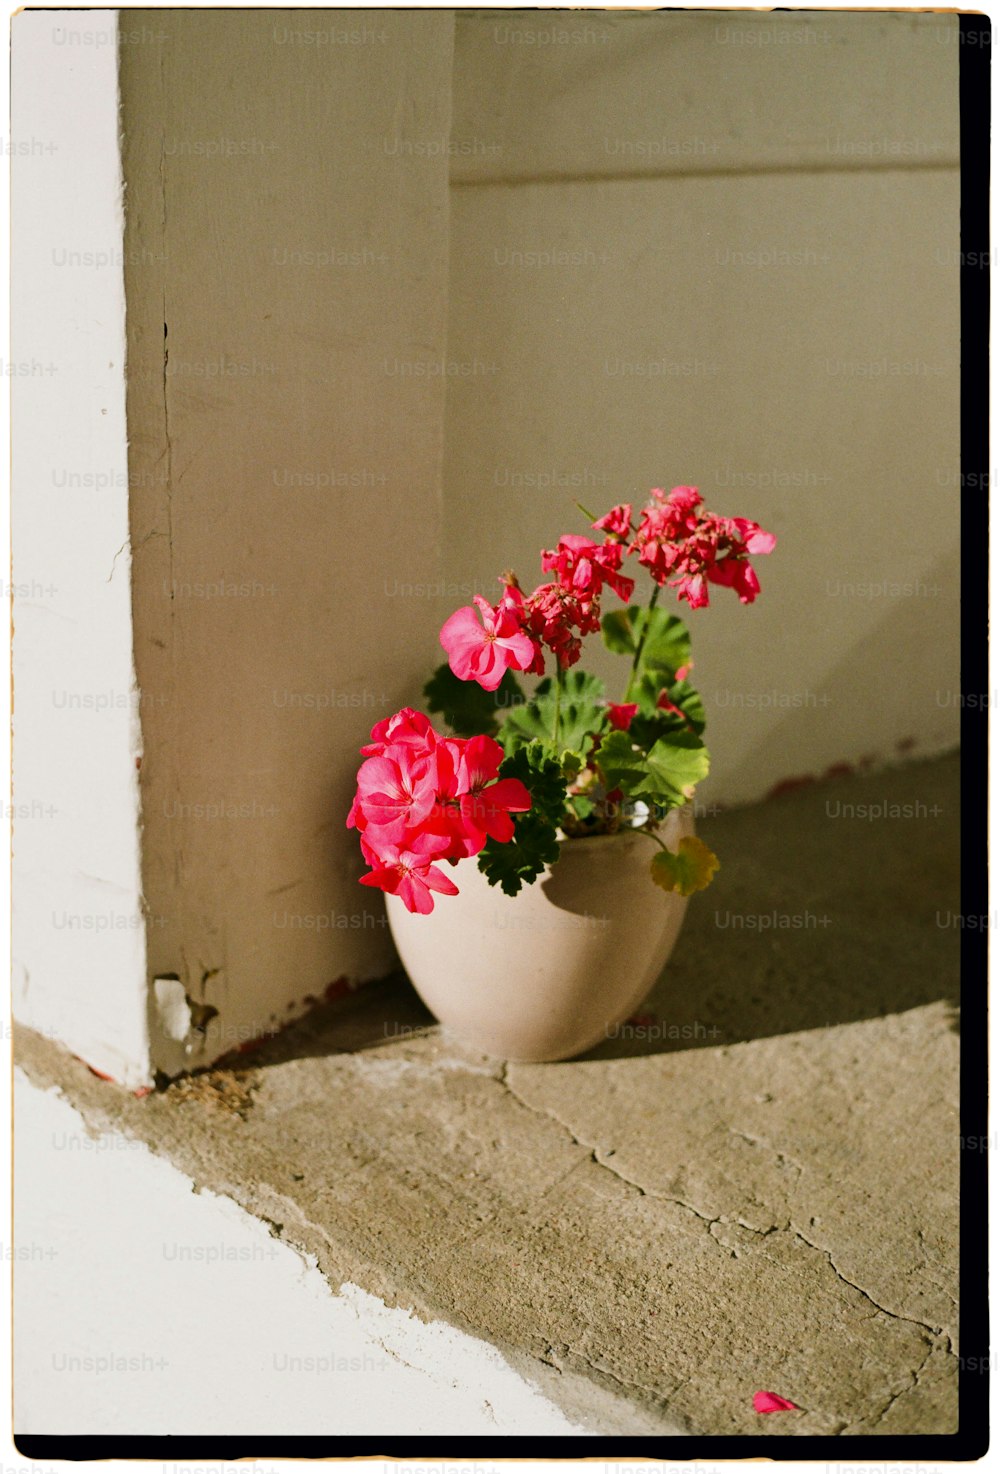 a potted plant with pink flowers sitting on a ledge